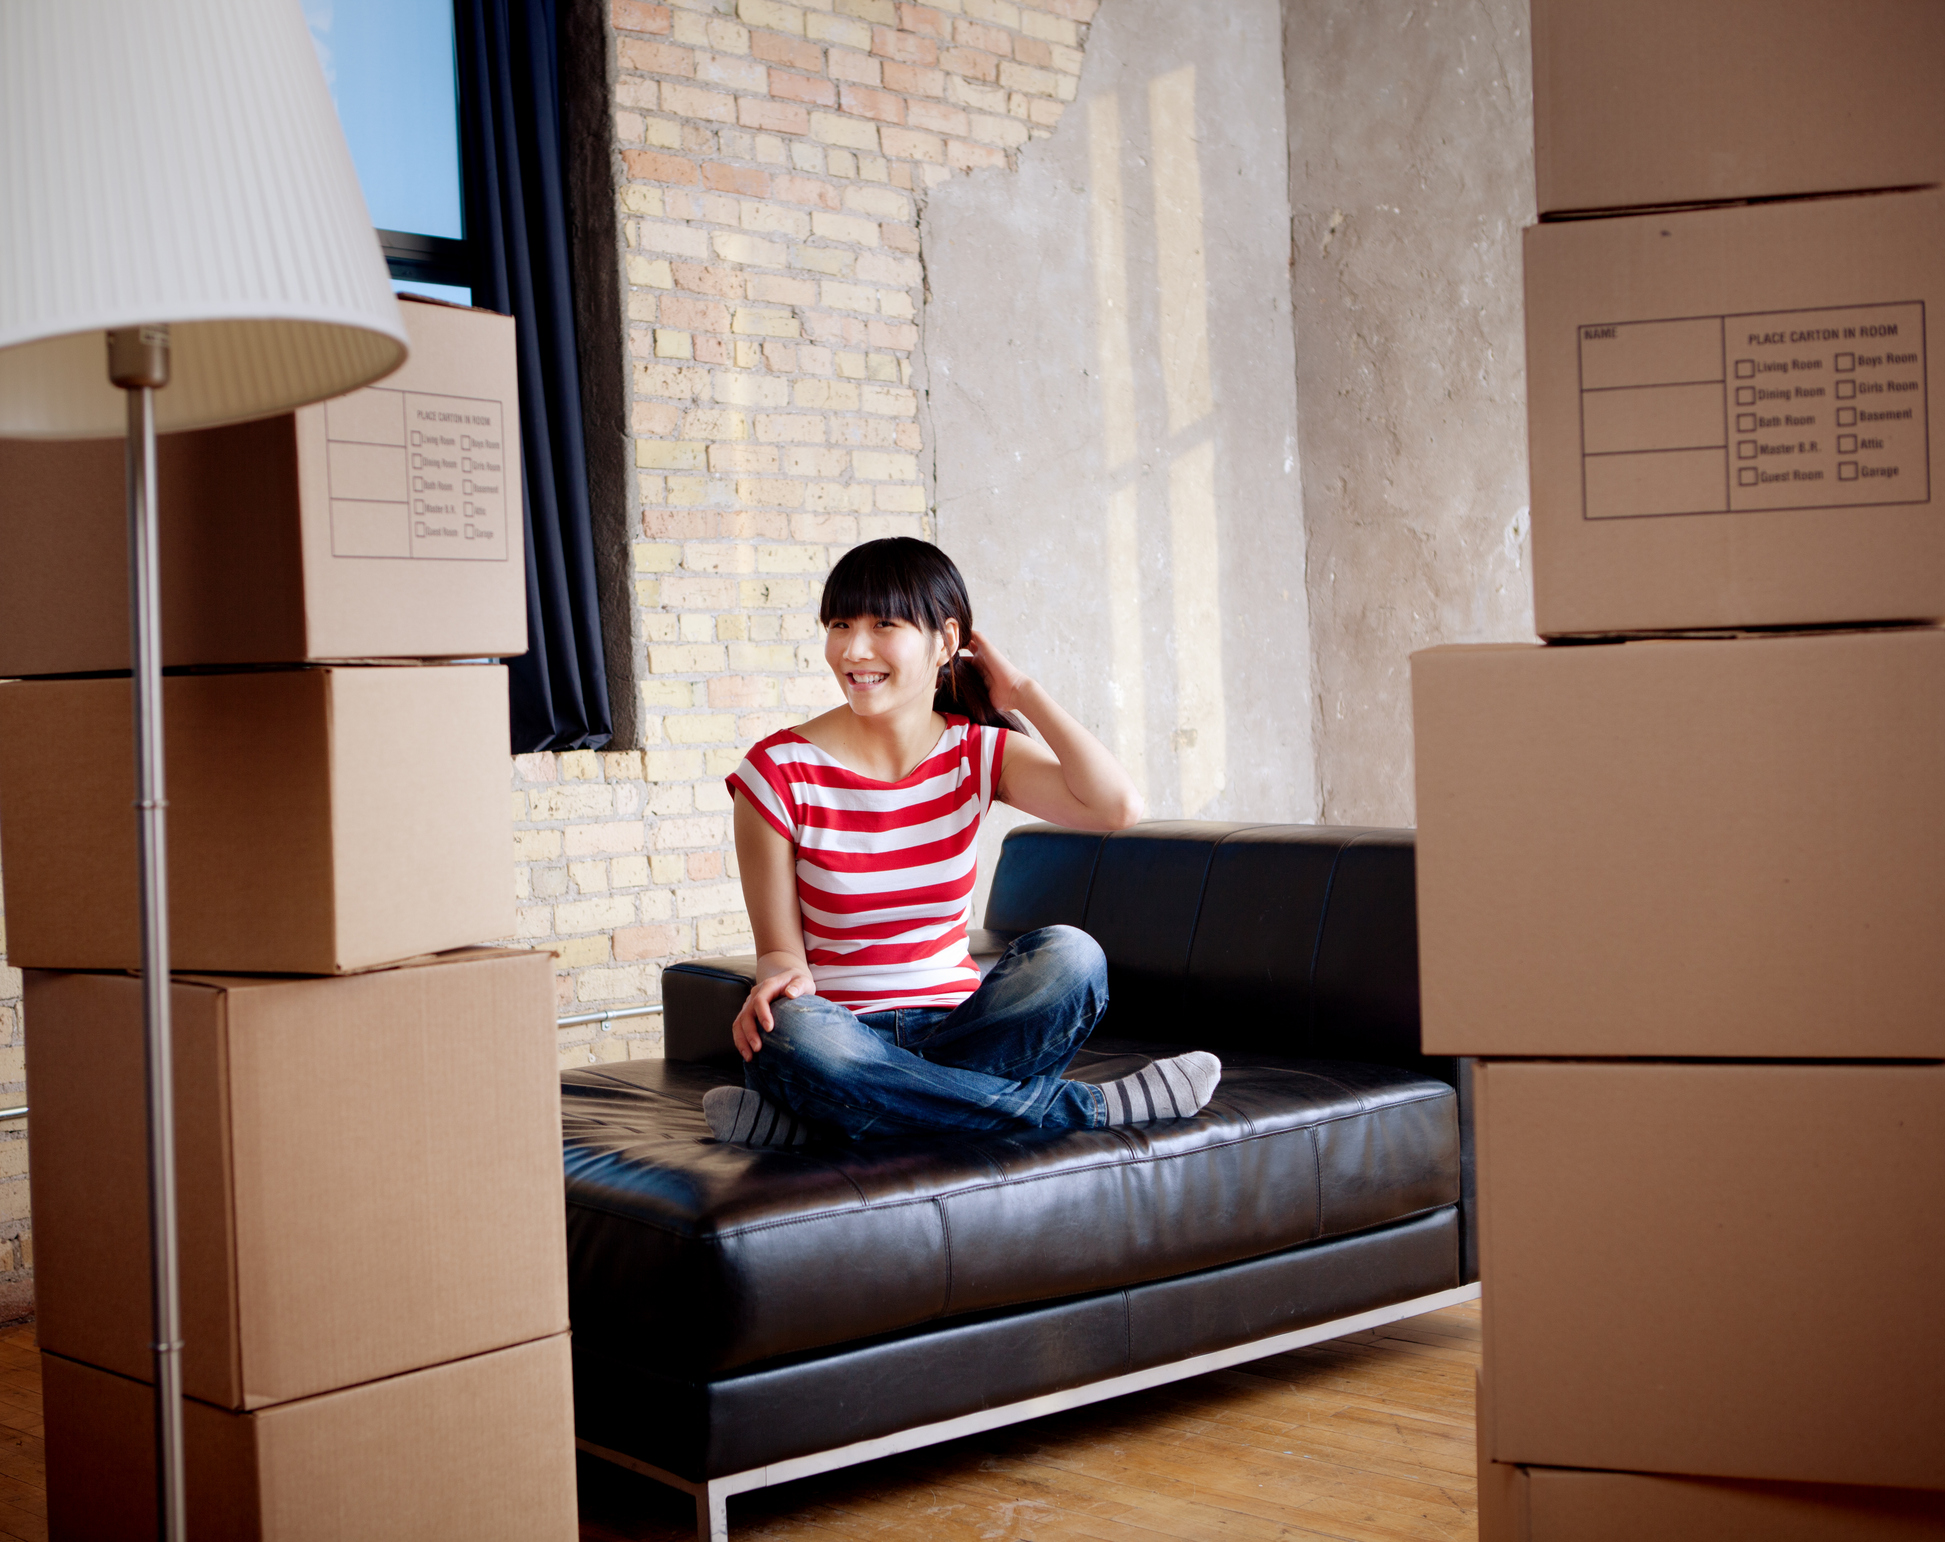 Subject: Horizontal view of a young Asian woman sitting cross legged on a sofa, surrounded by moving boxes. The interior suggests that she is happy that she has just moved into an urban loft apartment or condo.